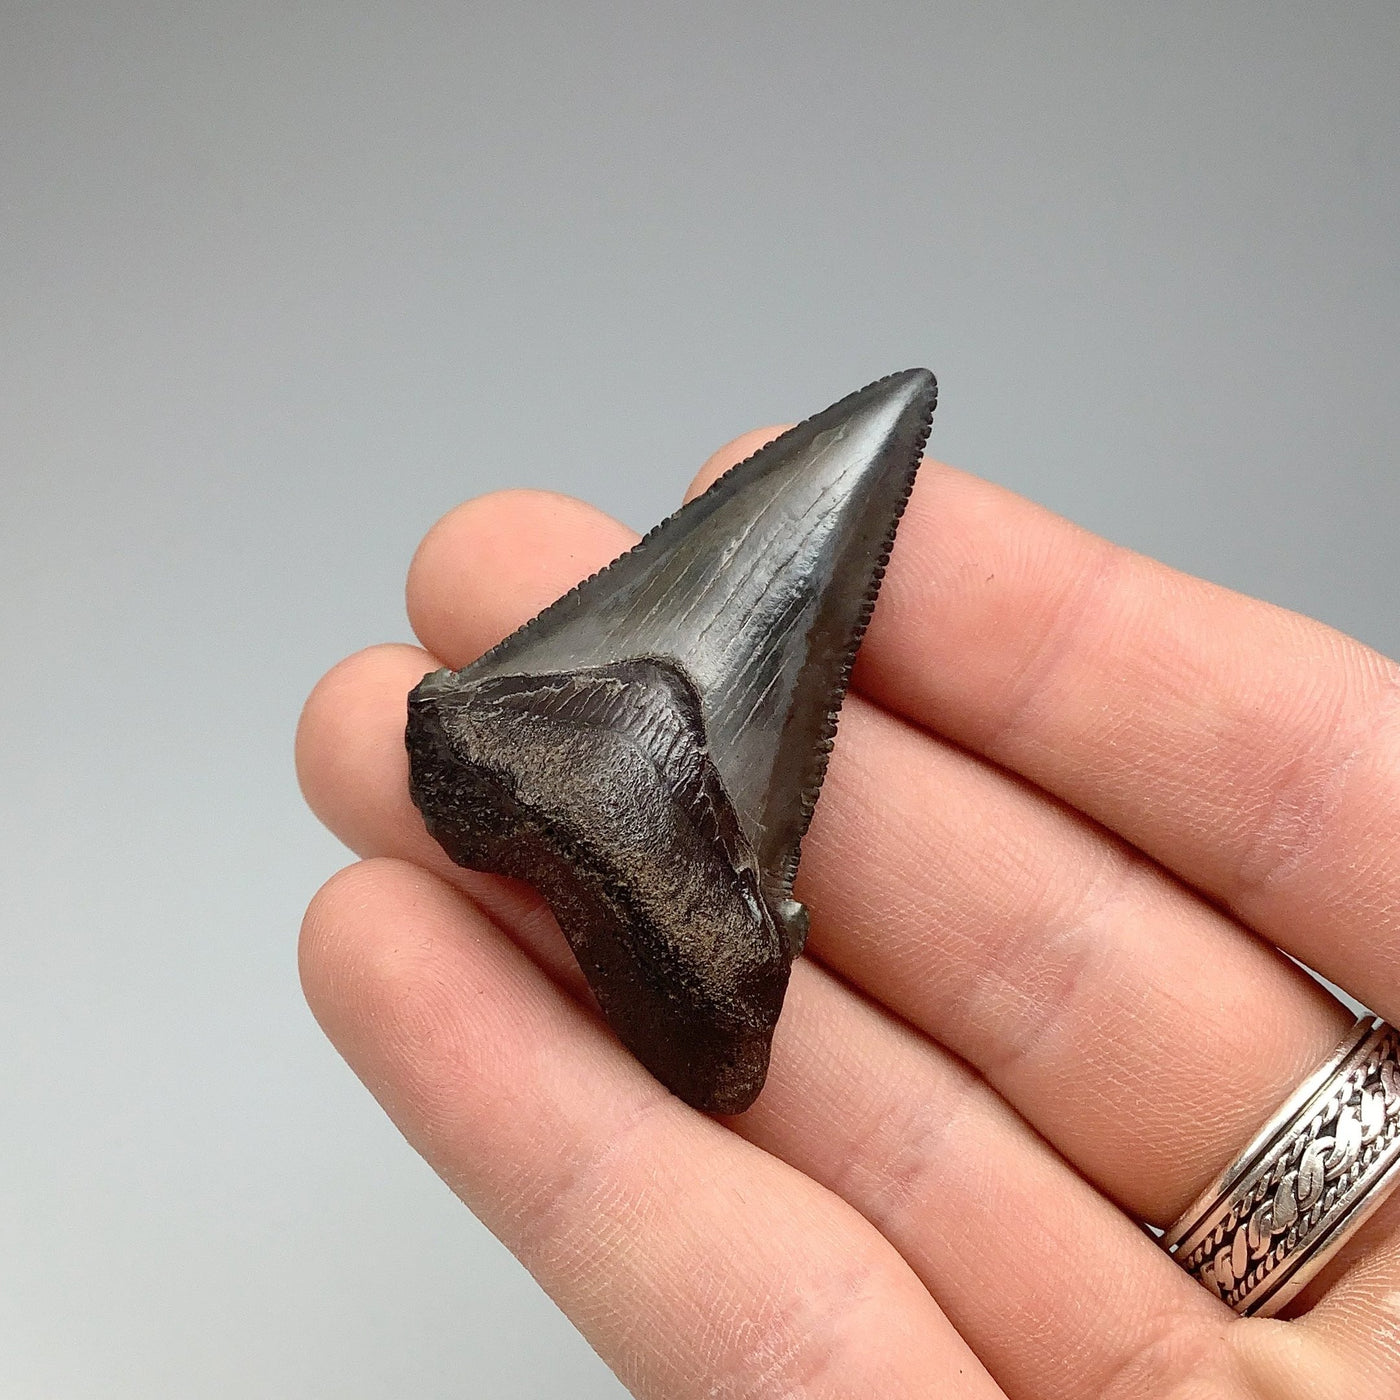 Fossilized Shark Tooth Specimen: Early Megalodon